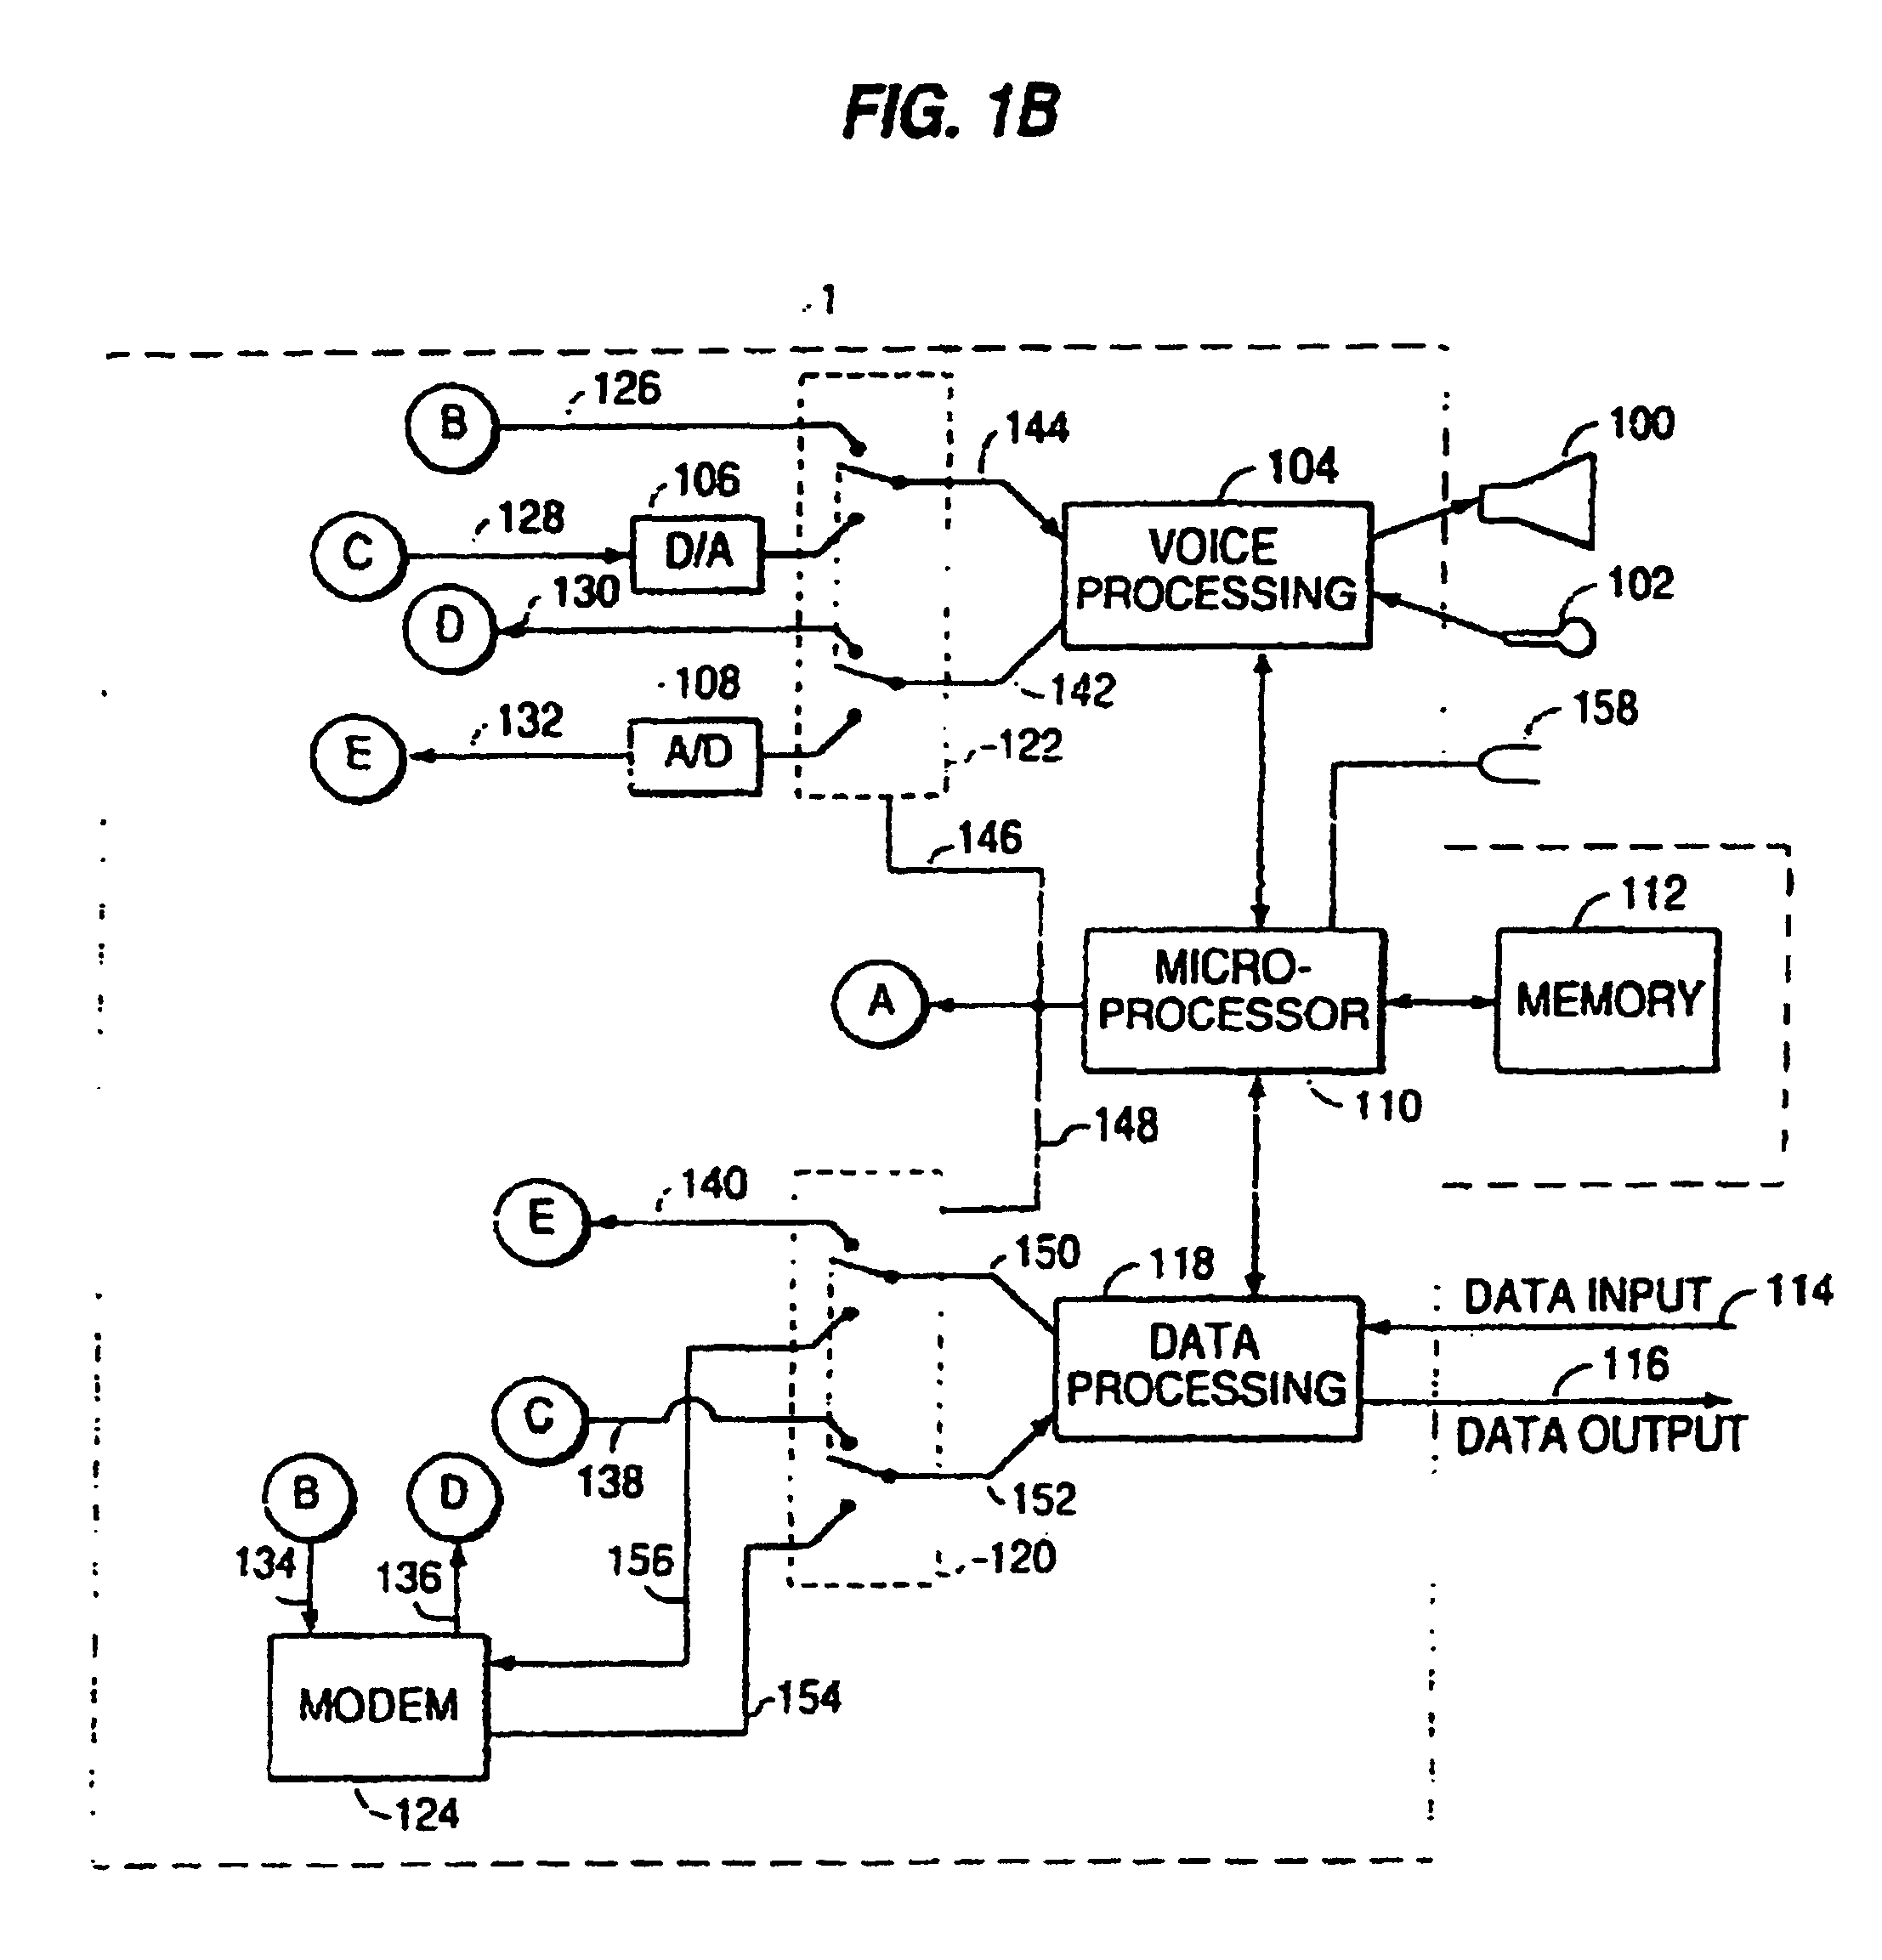 Apparatus and methods for networking omni-modal radio devices